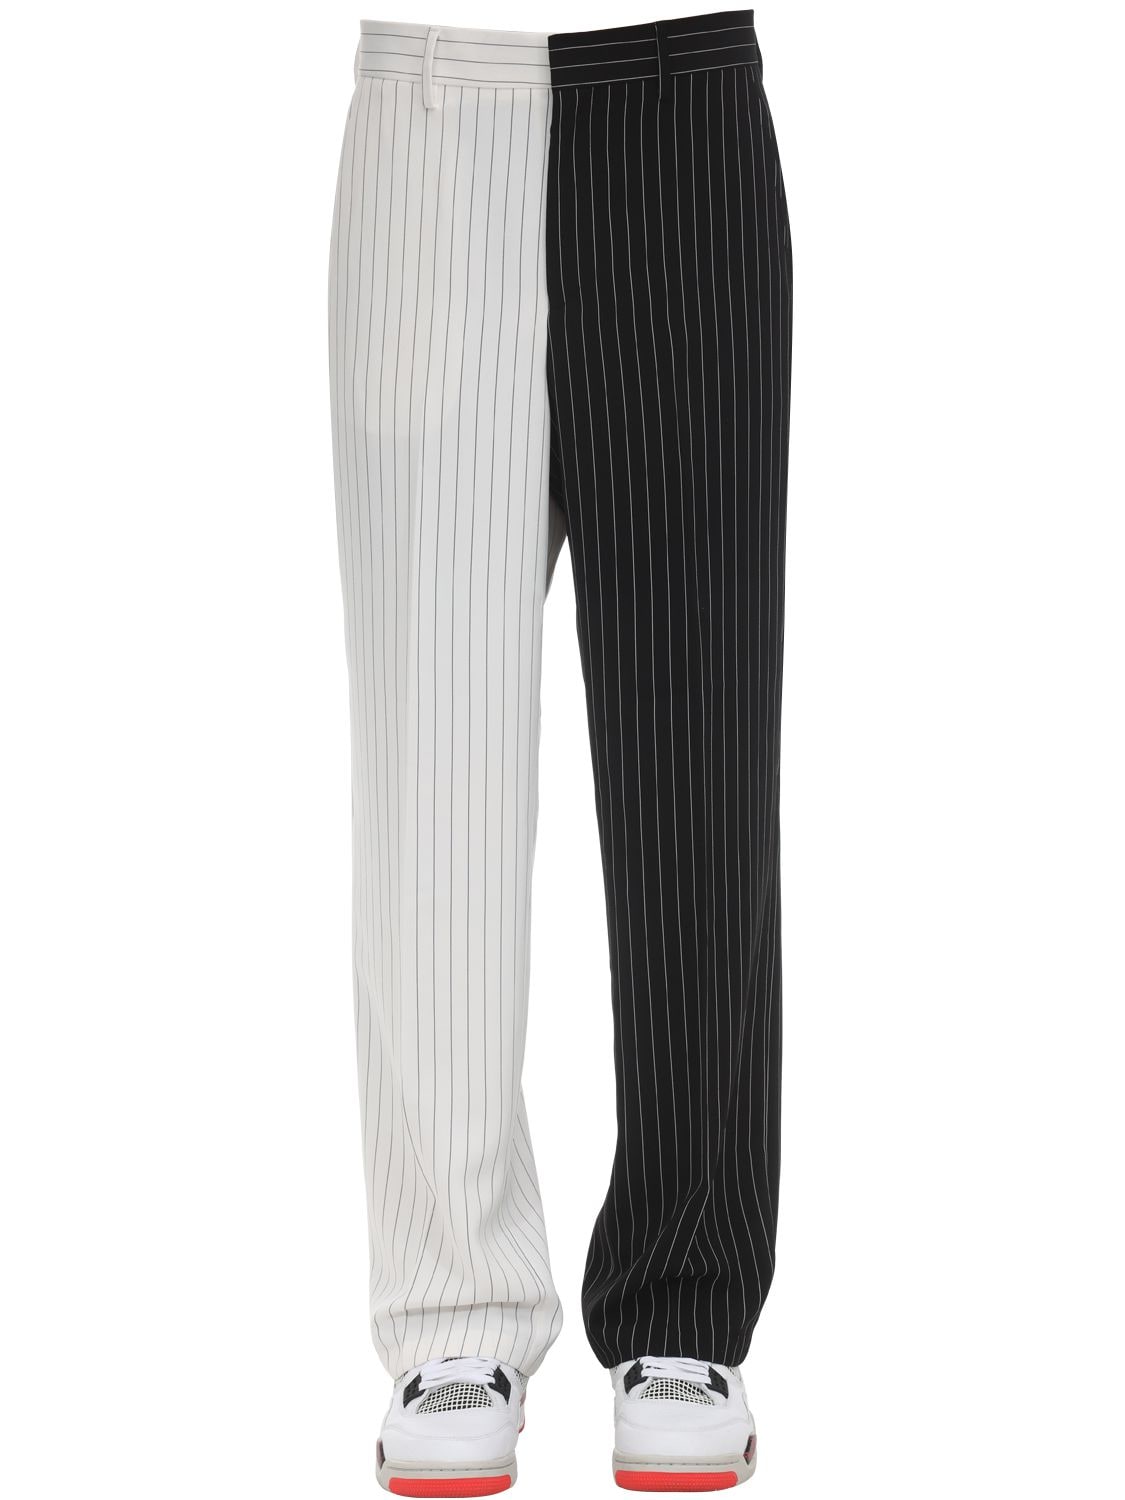 black pants with white pinstripes